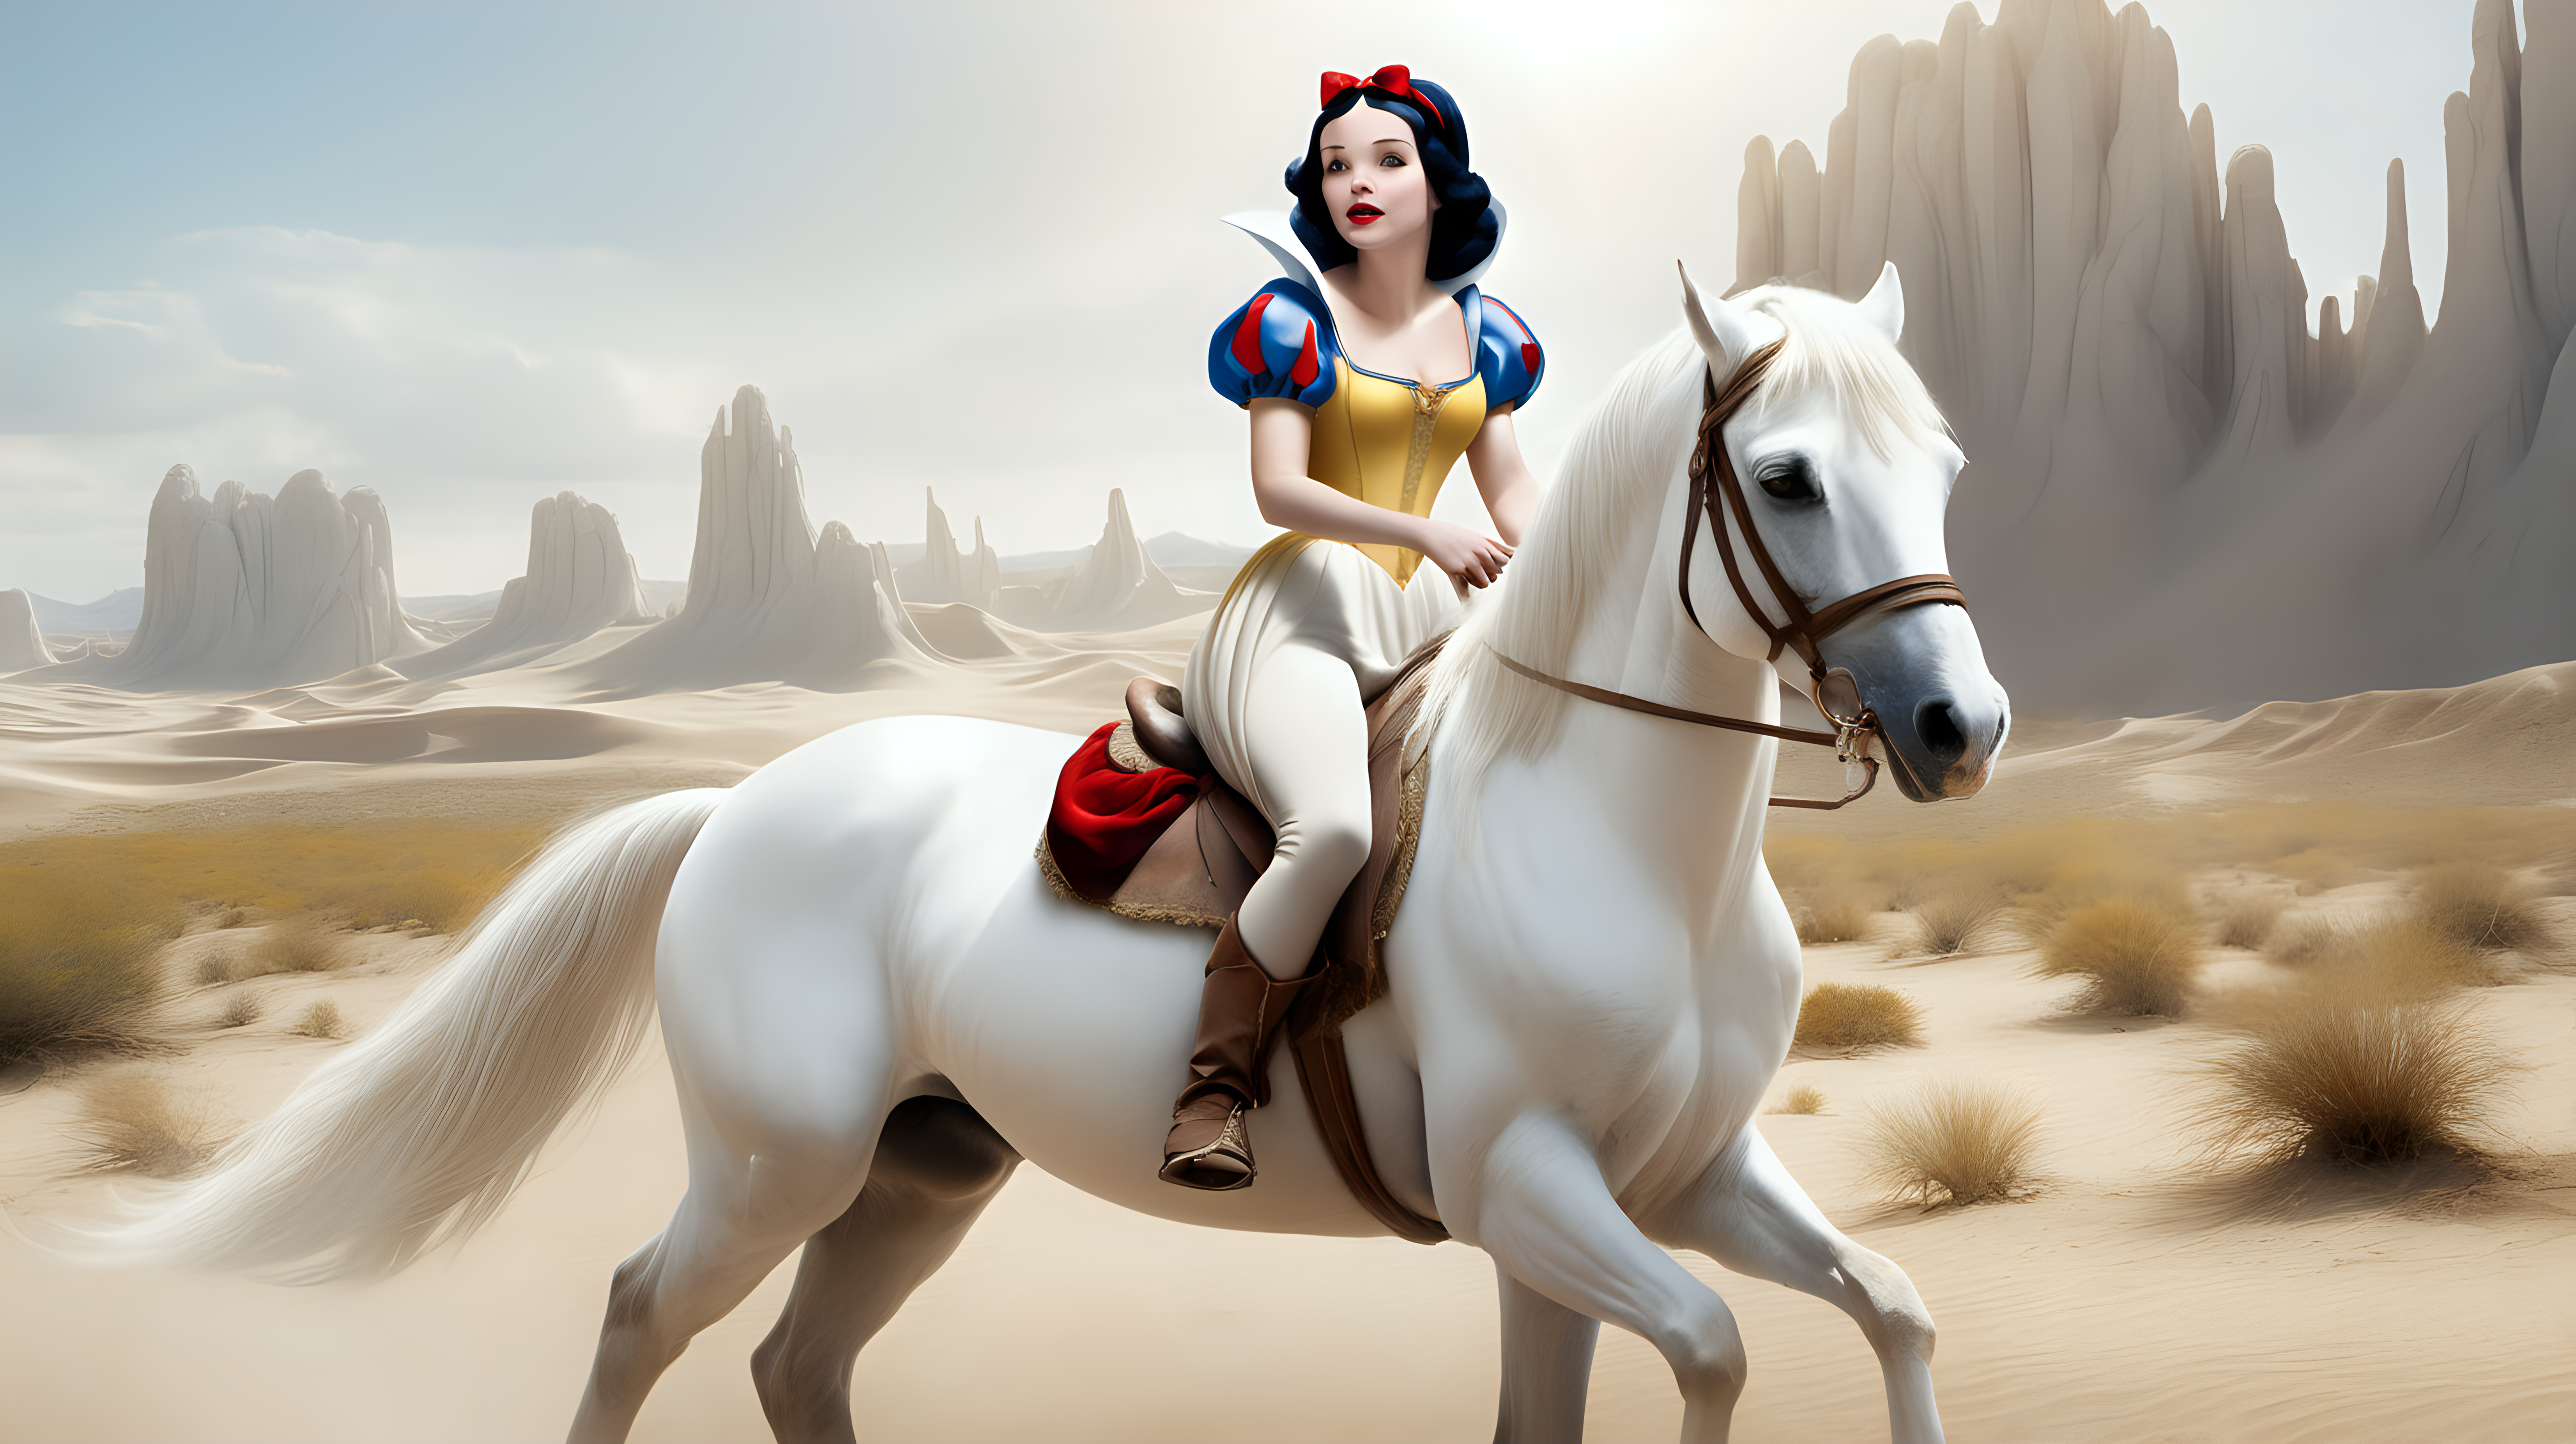 Snow White riding a white horse in the